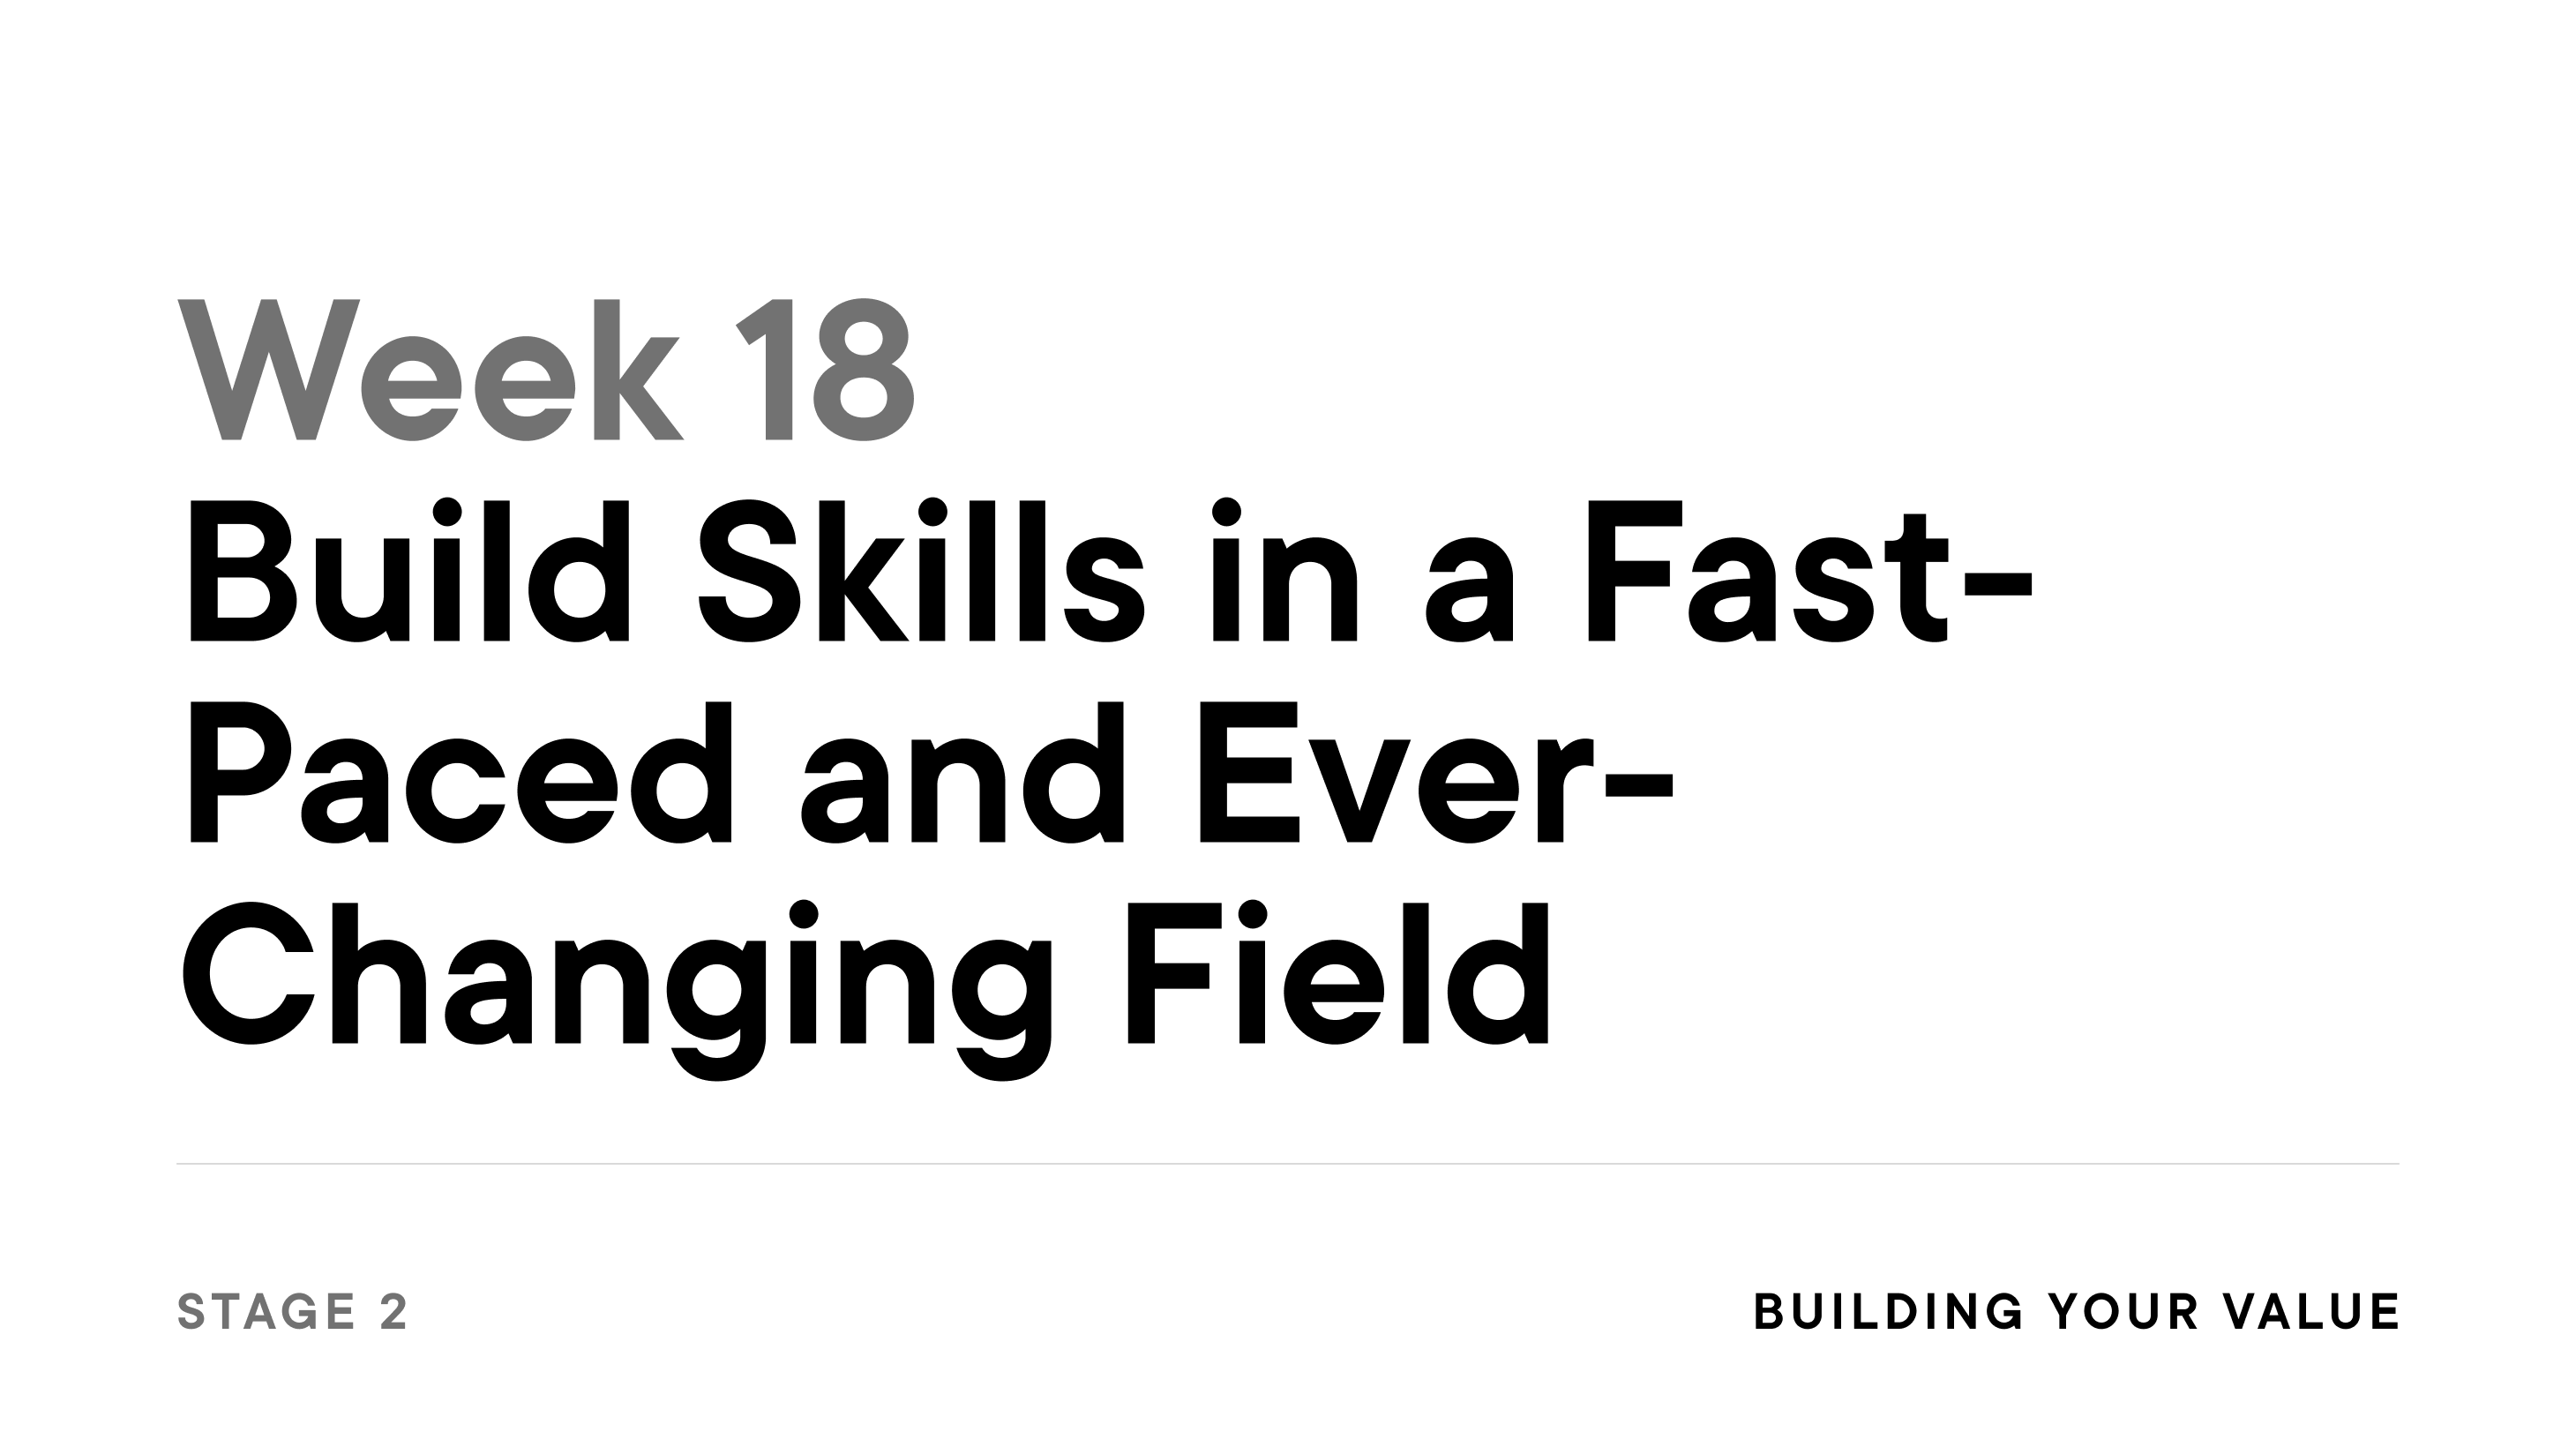 Week 18: Build Skills in a Fast-Paced and Ever-Changing Field